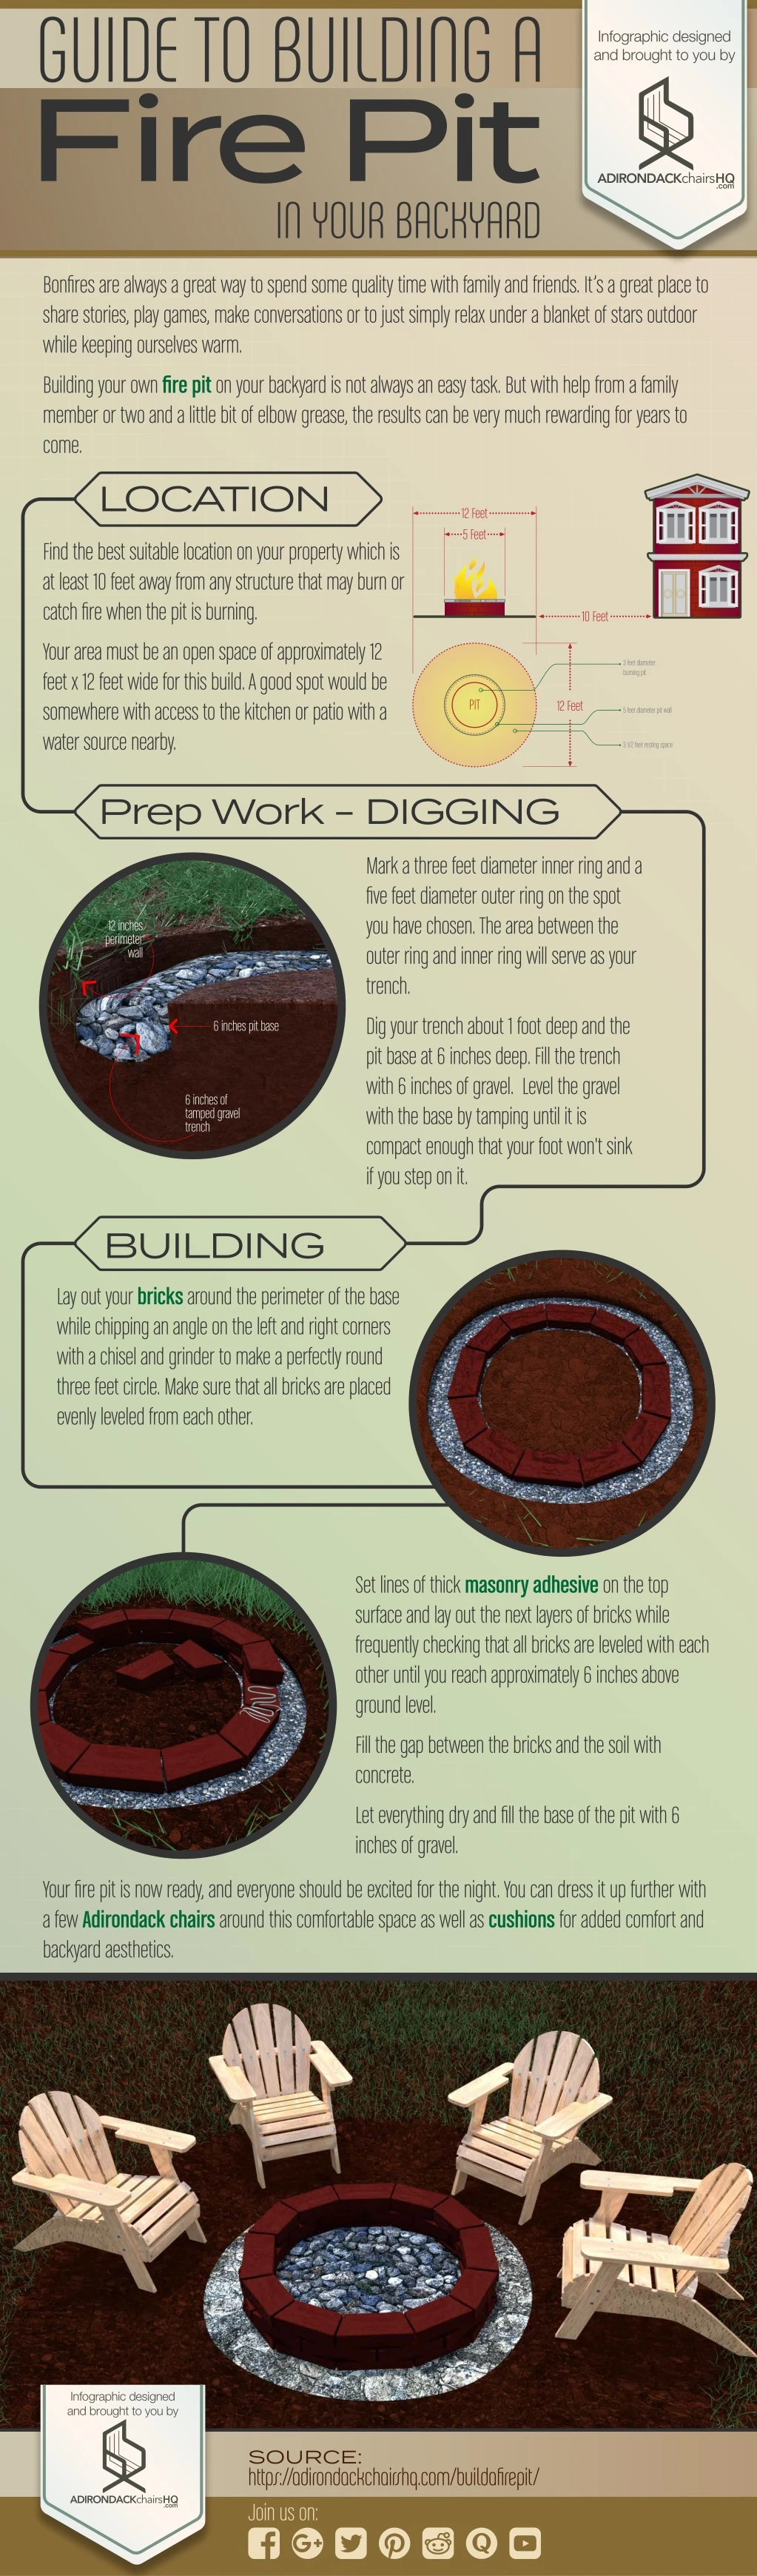 guide to building a fire pit